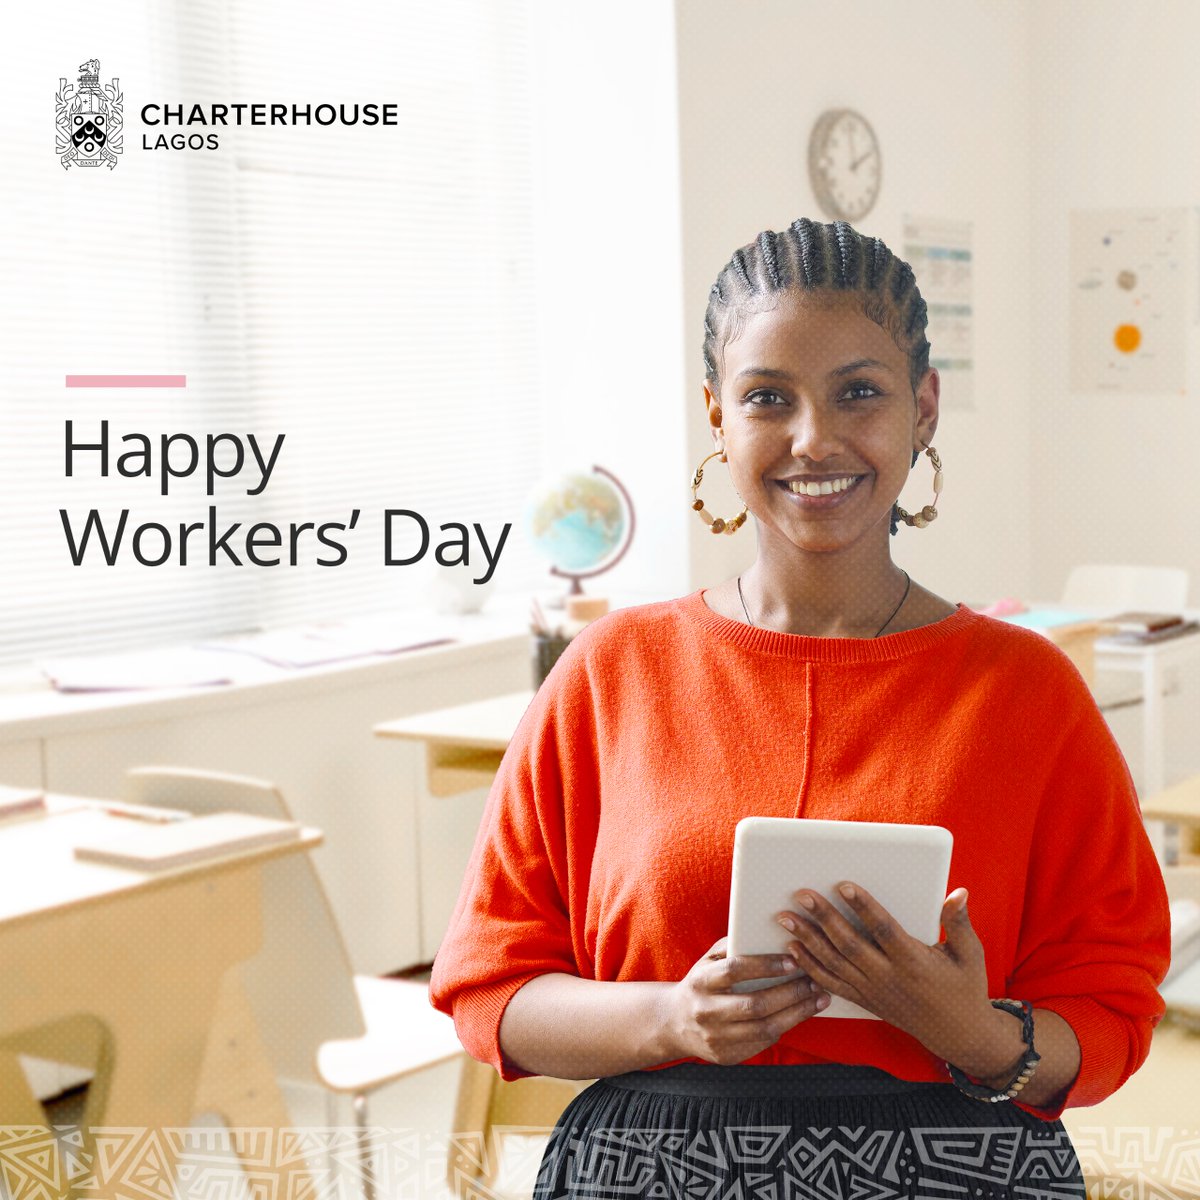 Work is a lifelong pursuit. Happy International Workers' Day to all the dads, mums, professionals, and service providers whose efforts collectively make our world meaningful. #InternationalWorkersDay #Excellence #Integrity #Respect #Service #Work #CharterhouseLagos